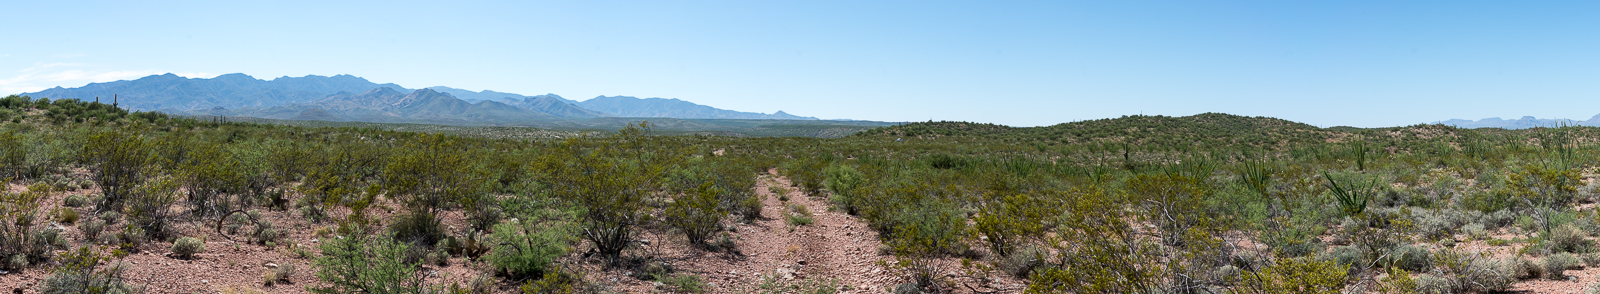 Seemingly endless creosote with the Santa Catalina Mountains in the distance, walking back to FR 4407 from Pink Tank. July 2016.